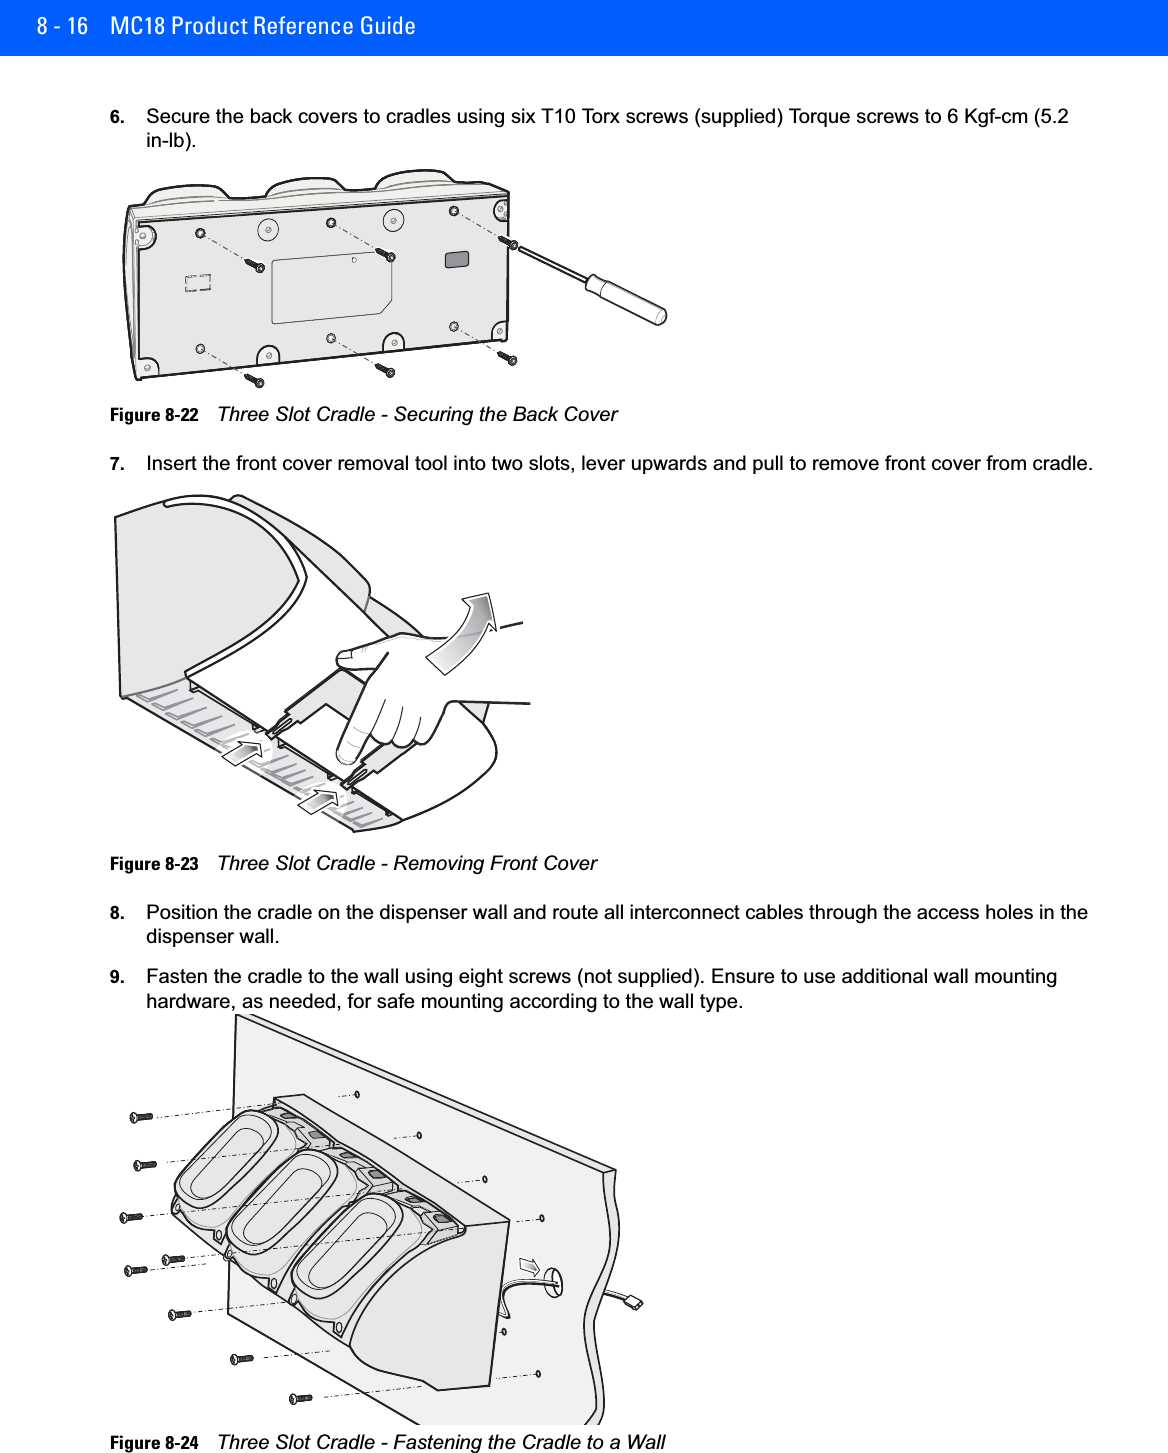 8 - 16 MC18 Product Reference Guide6. Secure the back covers to cradles using six T10 Torx screws (supplied) Torque screws to 6 Kgf-cm (5.2 in-lb).Figure 8-22    Three Slot Cradle - Securing the Back Cover7. Insert the front cover removal tool into two slots, lever upwards and pull to remove front cover from cradle.Figure 8-23    Three Slot Cradle - Removing Front Cover8. Position the cradle on the dispenser wall and route all interconnect cables through the access holes in the dispenser wall.9. Fasten the cradle to the wall using eight screws (not supplied). Ensure to use additional wall mounting hardware, as needed, for safe mounting according to the wall type.Figure 8-24    Three Slot Cradle - Fastening the Cradle to a Wall